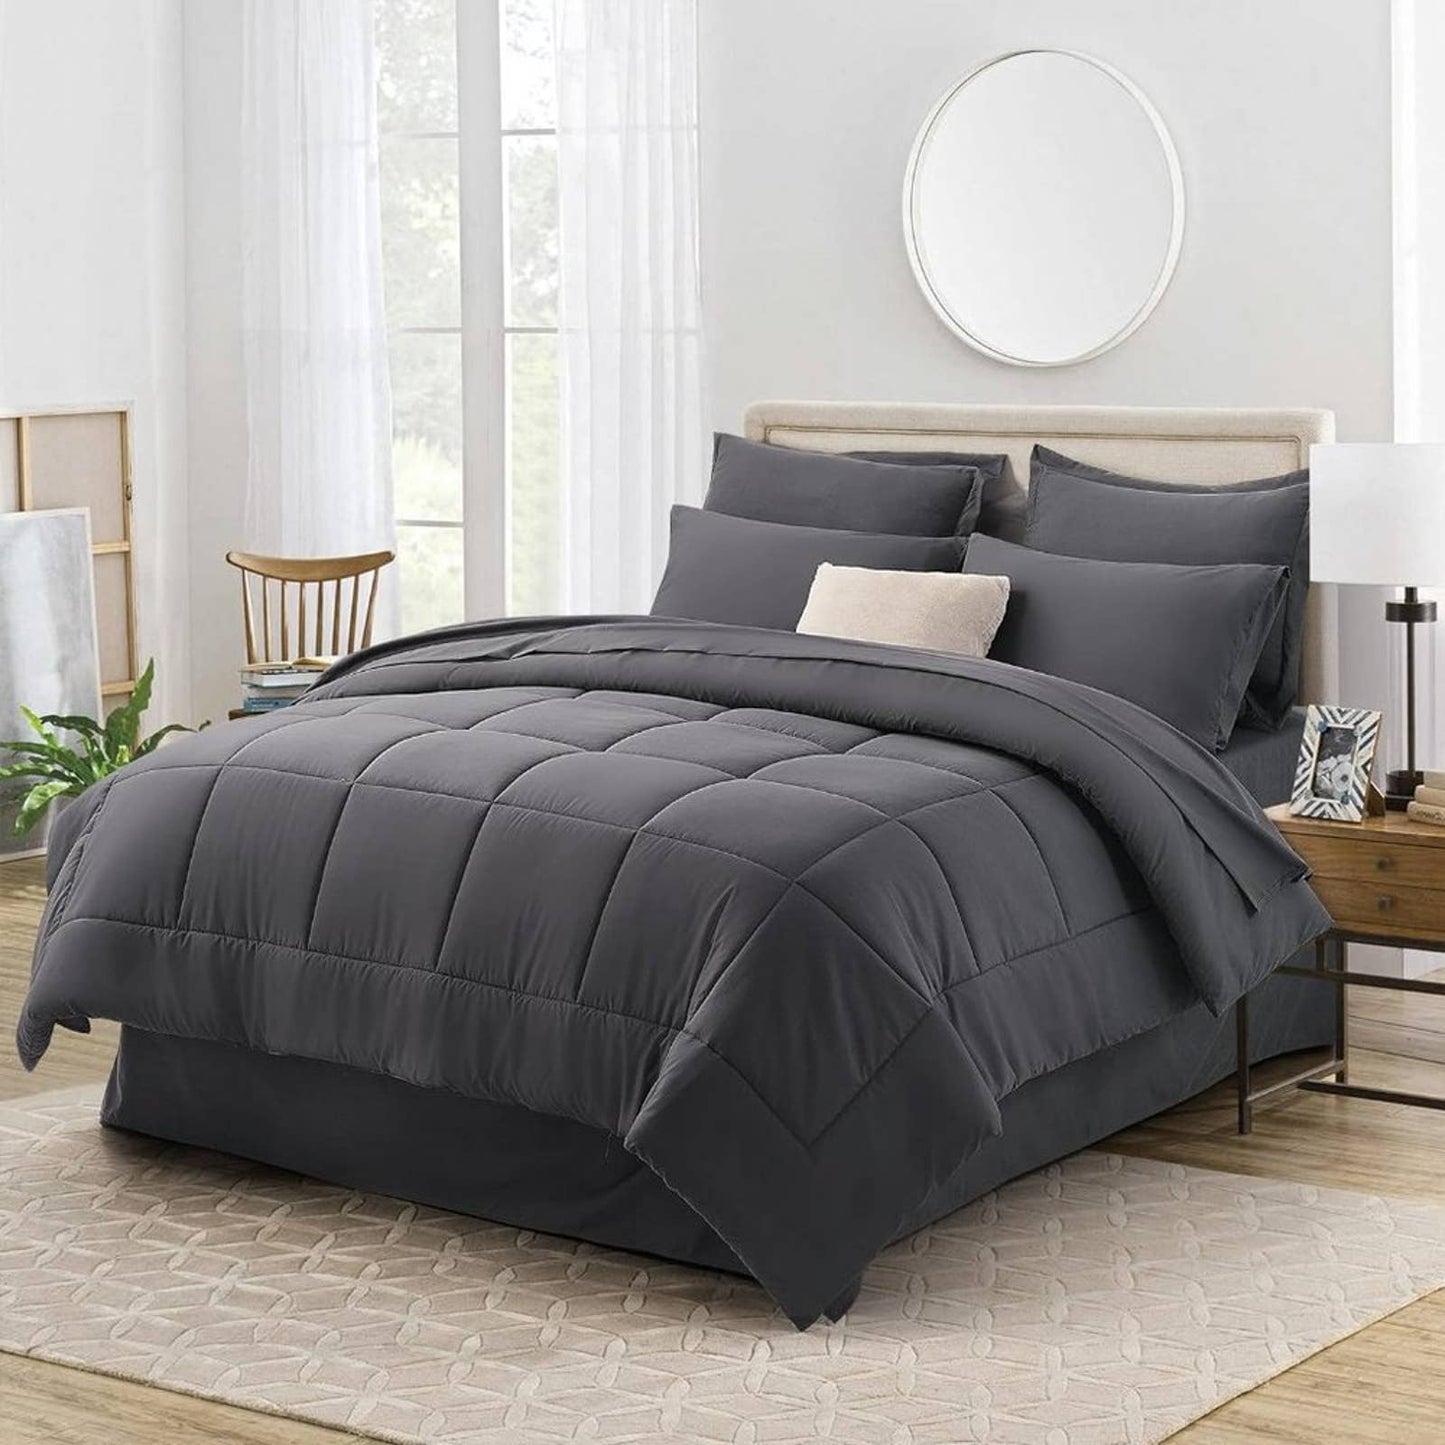 PARKOL Bed in a Bag 6-Piece Comforter Set Twin Size All Season Bedding